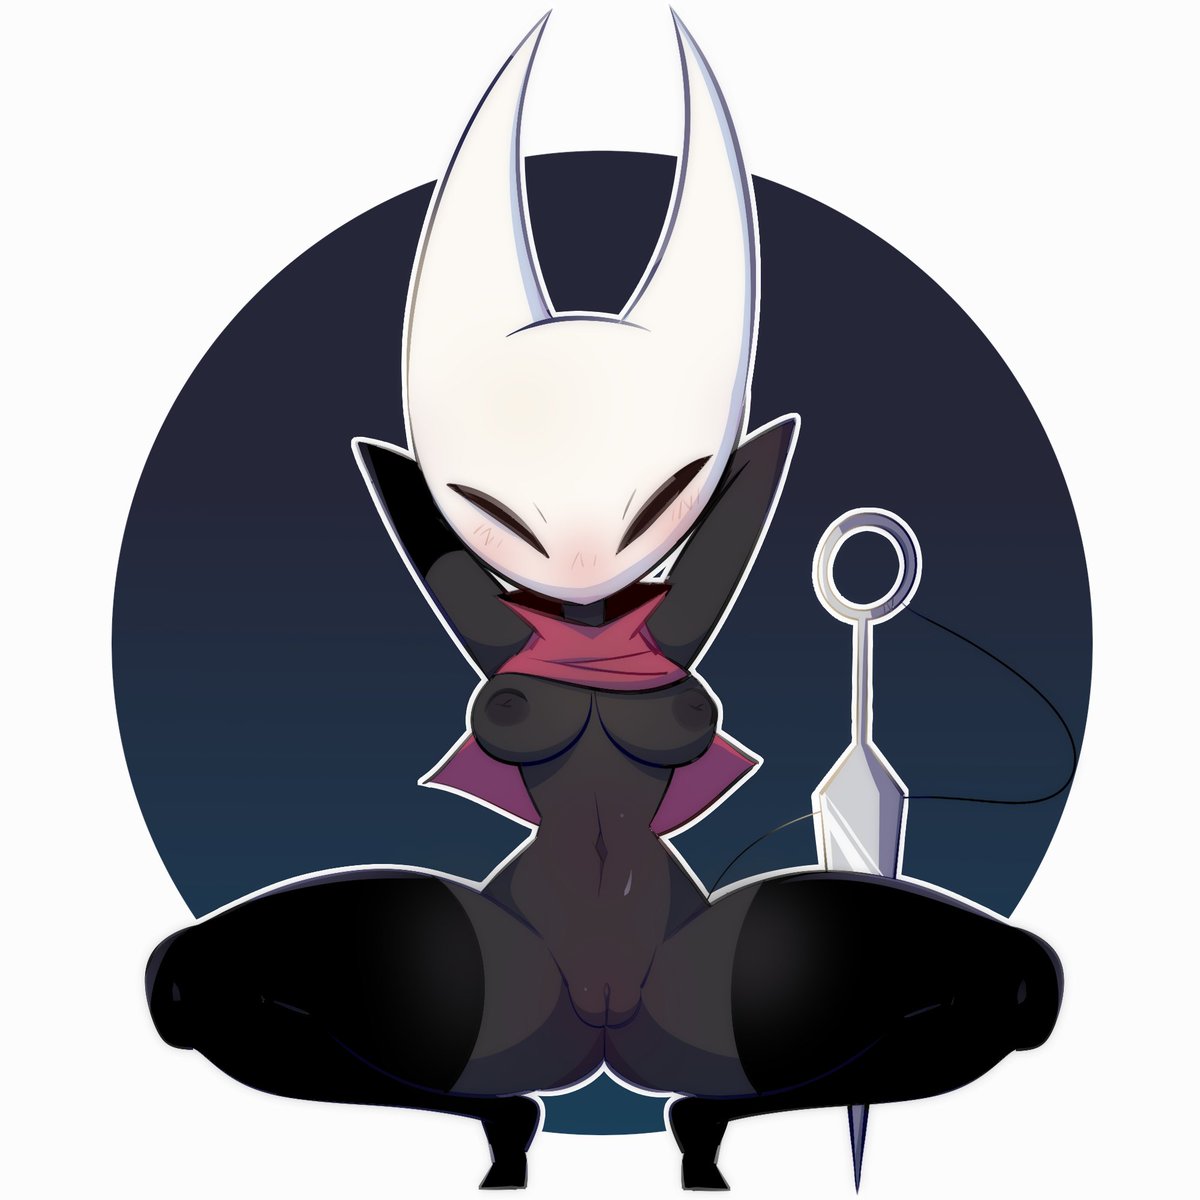 Hollow Knight - Hornet Commission Commissions me here! https://forms.gle/Xe...